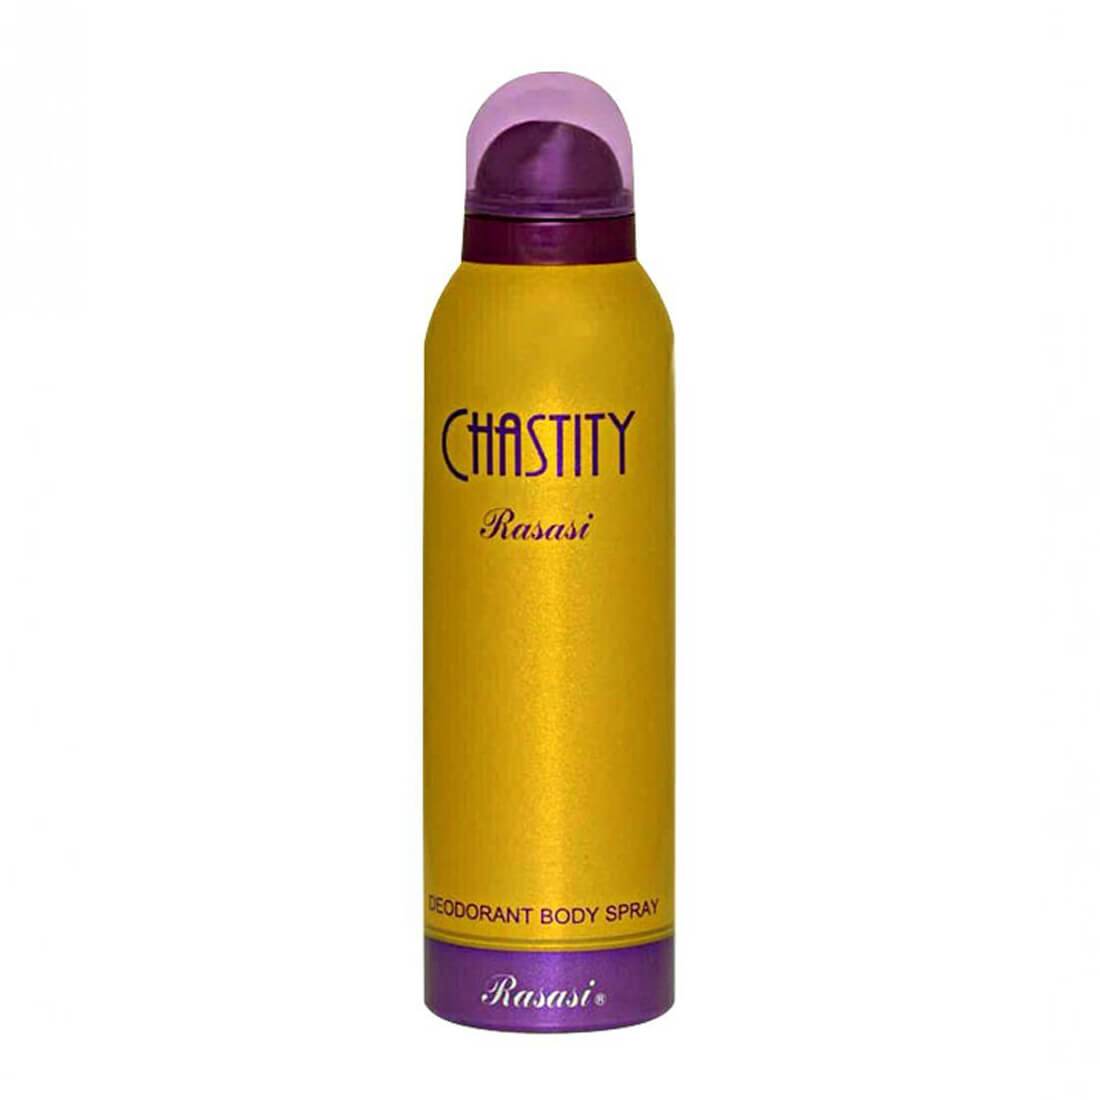 Chastity Pour Femme